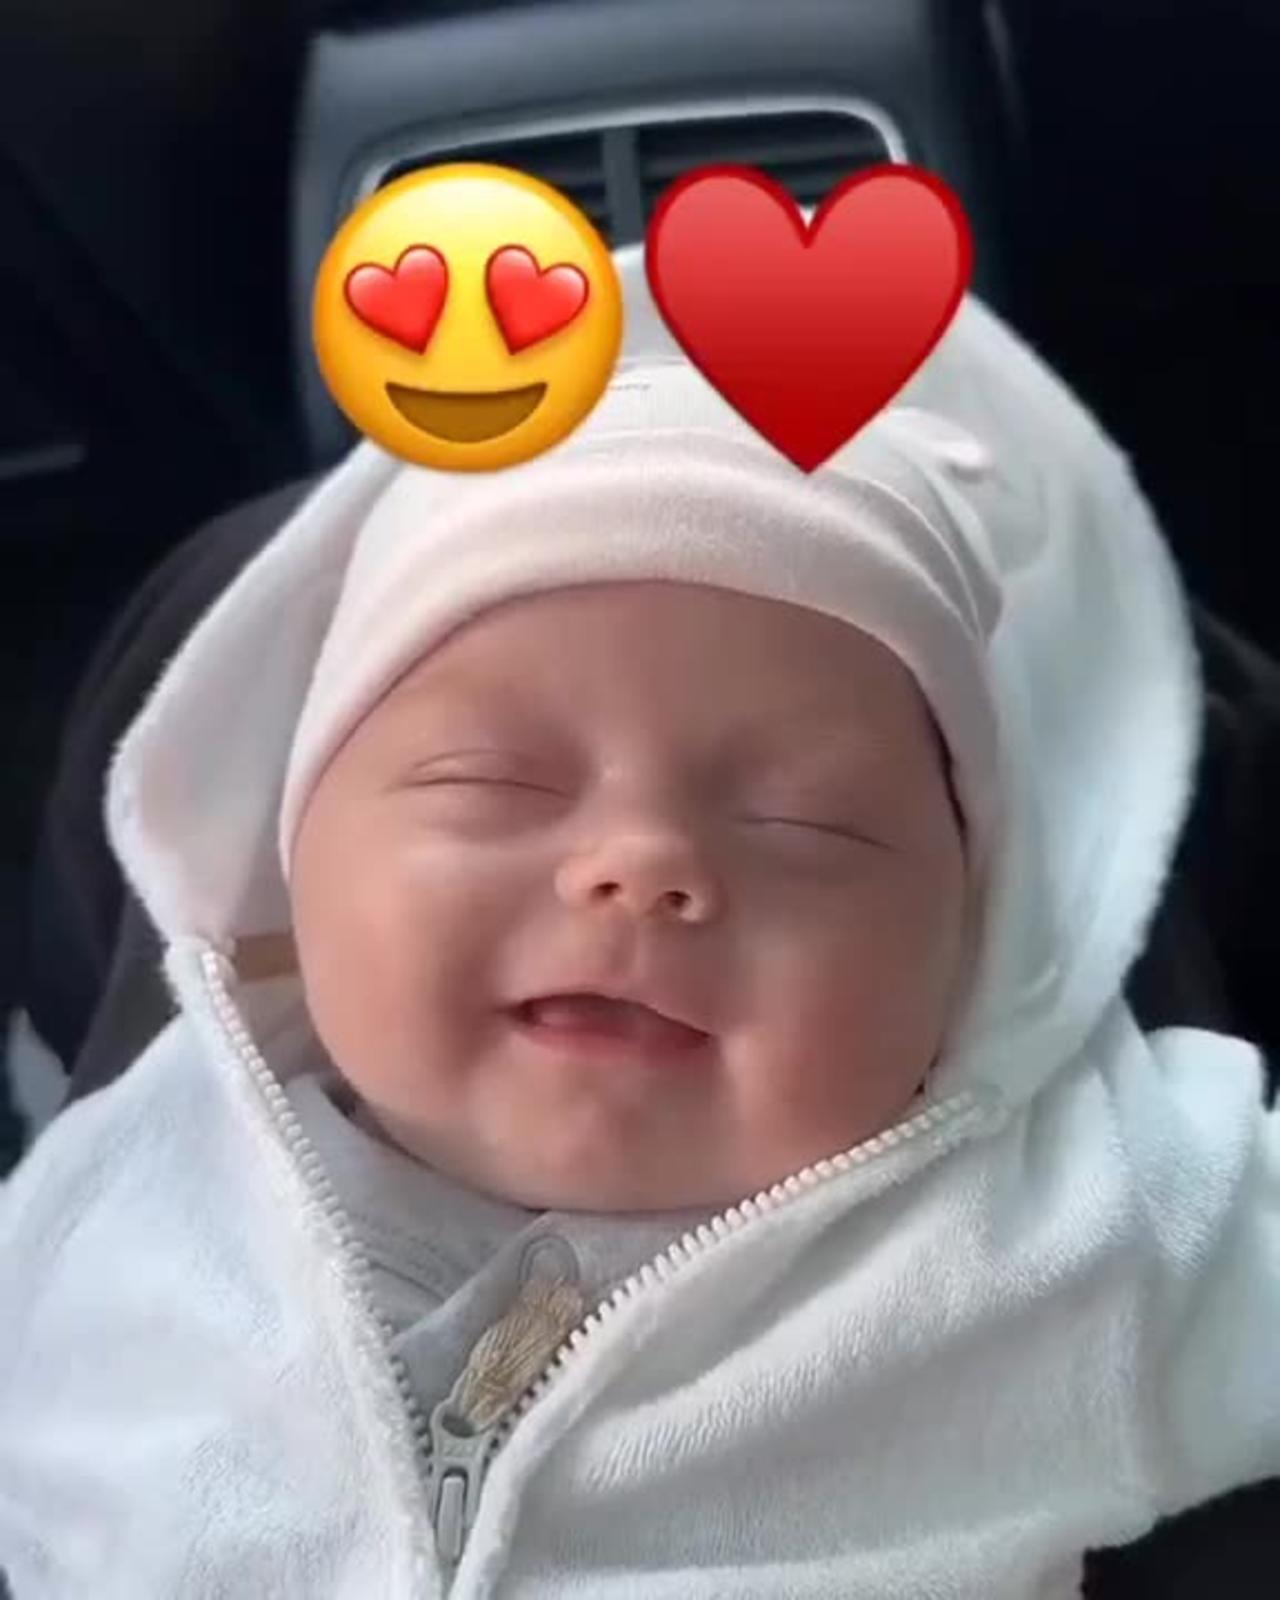 Joyful Moments: 6-Month-Old Baby's Infectious Smile Will Brighten Your Day!